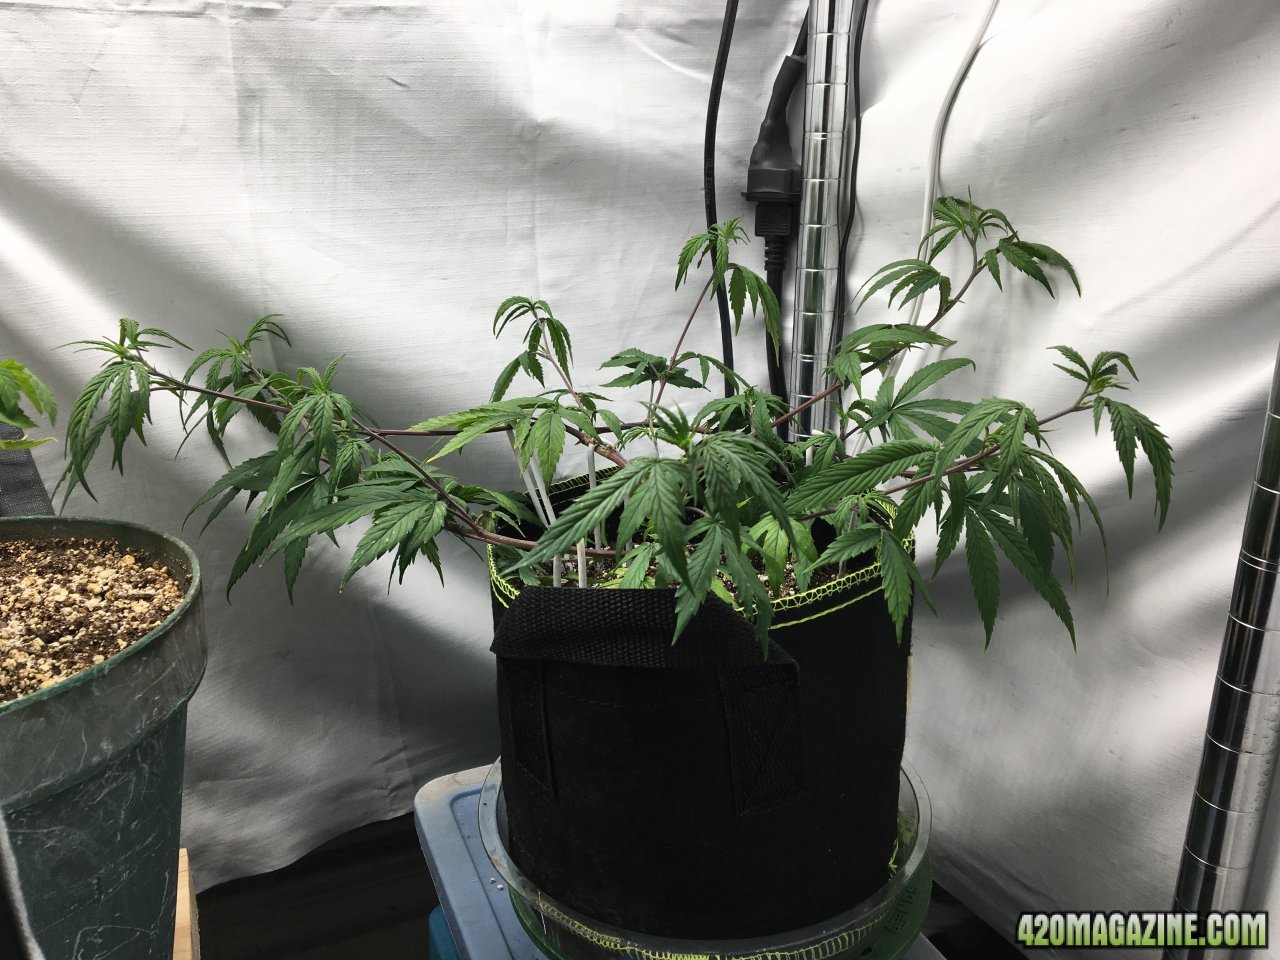 Jamaican 1.4 (Day 41)